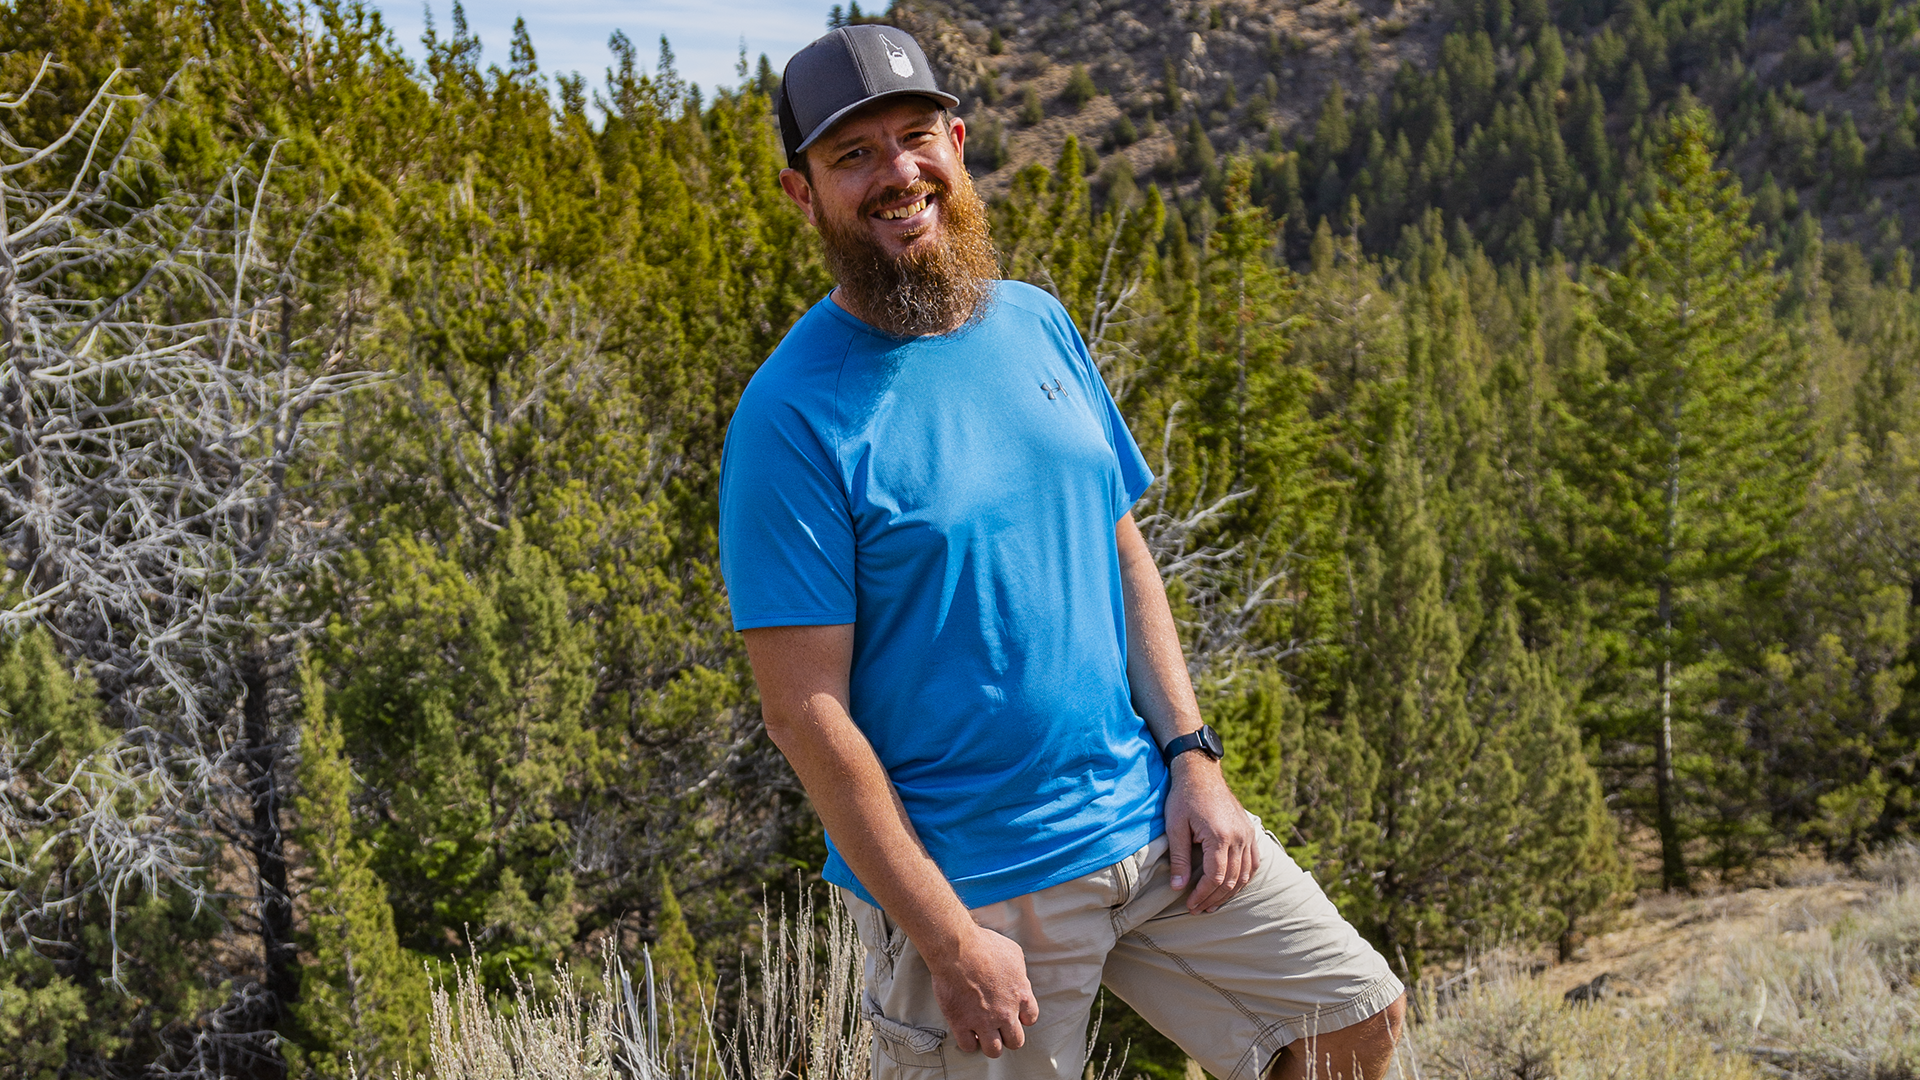 Brent Seamons, The Peace of Nature Project Founder